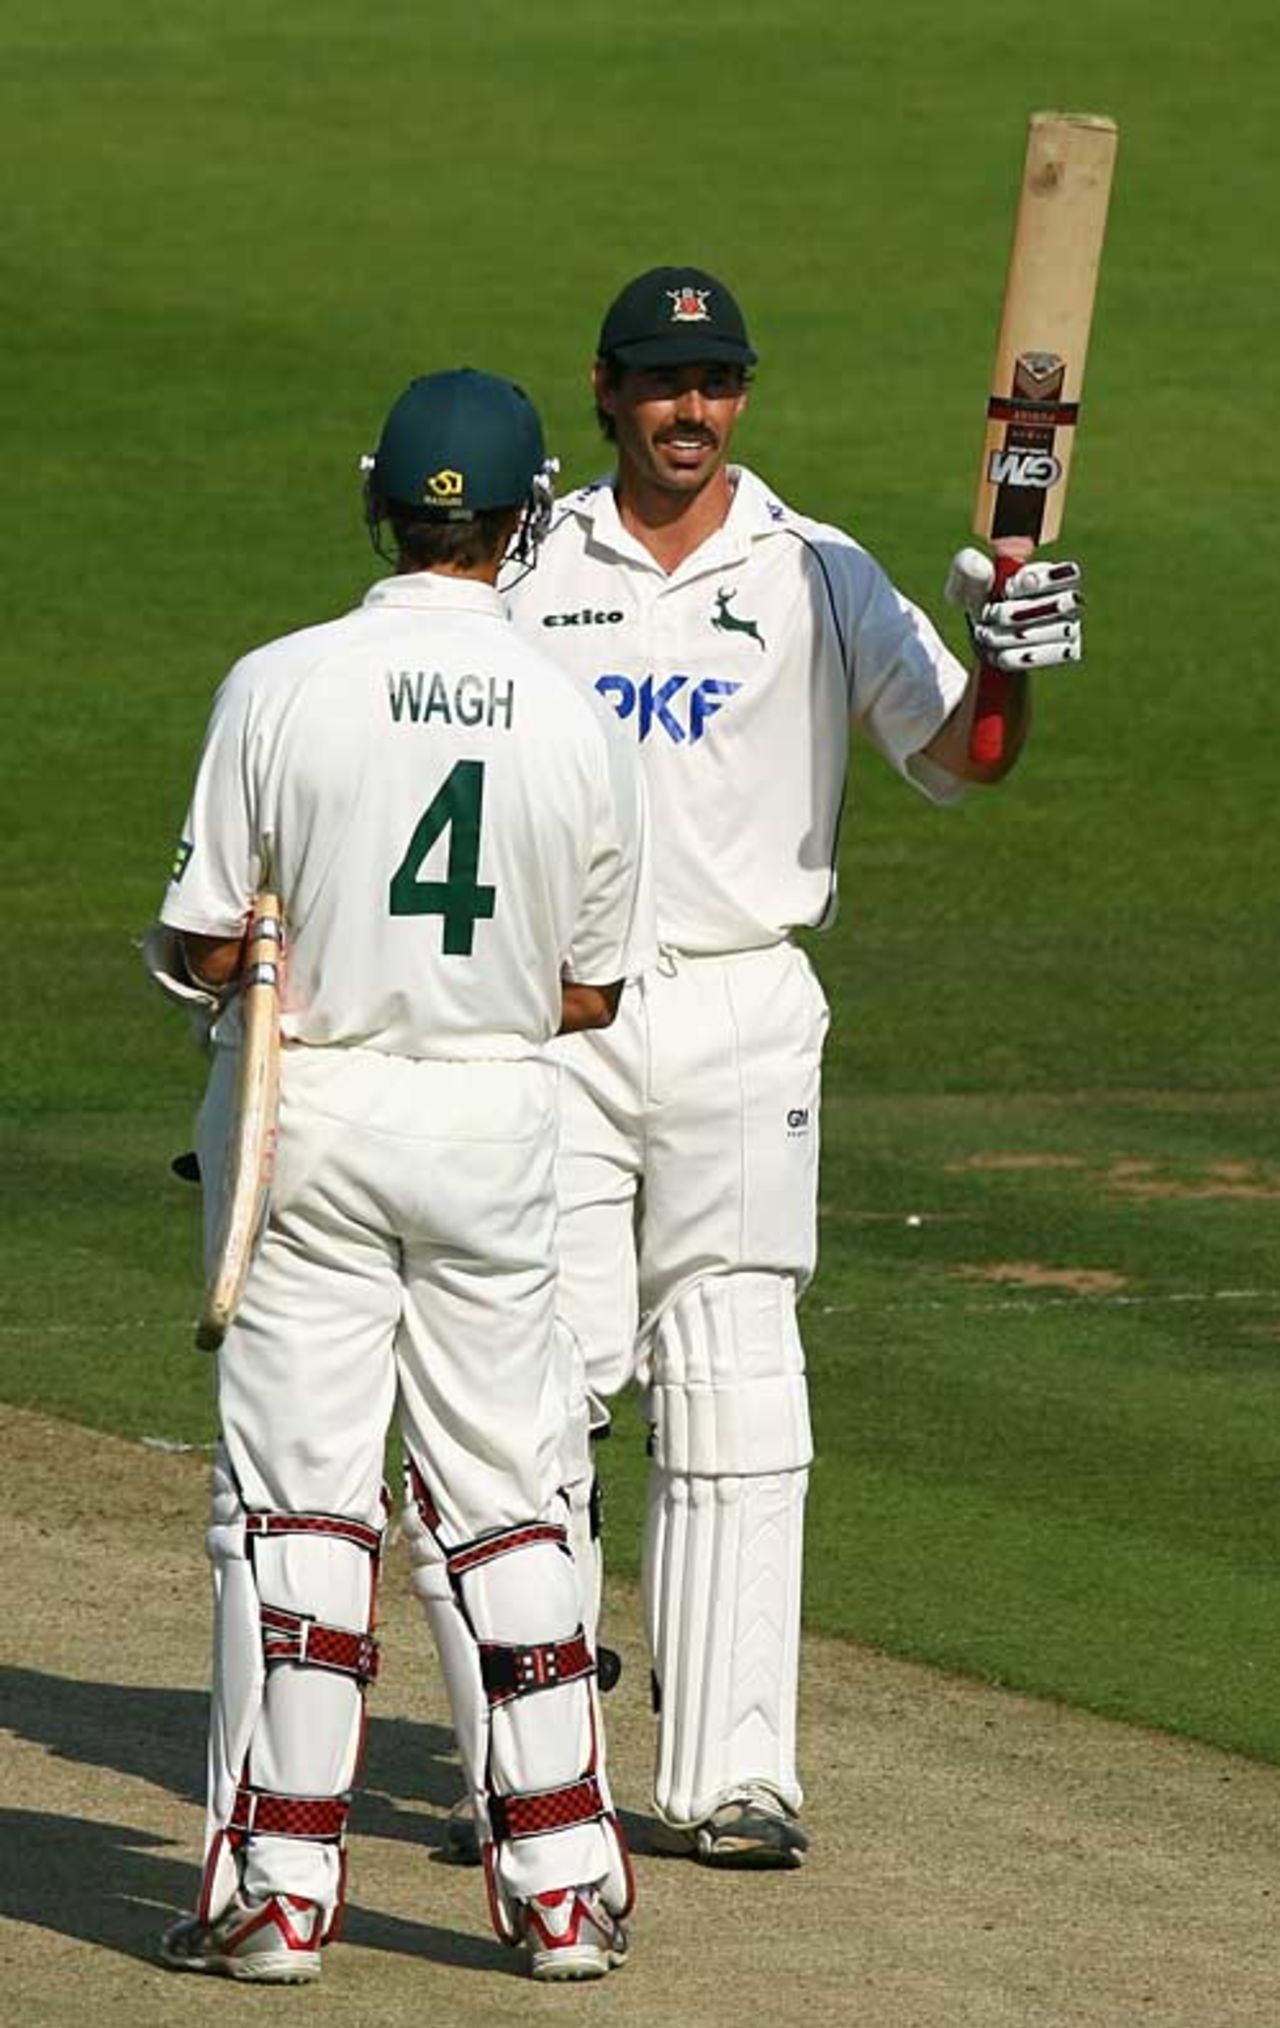 Stephen Fleming acknowledges his hundred, Middlesex v Nottinghamshire, County Championship, Lord's, August 29, 2007